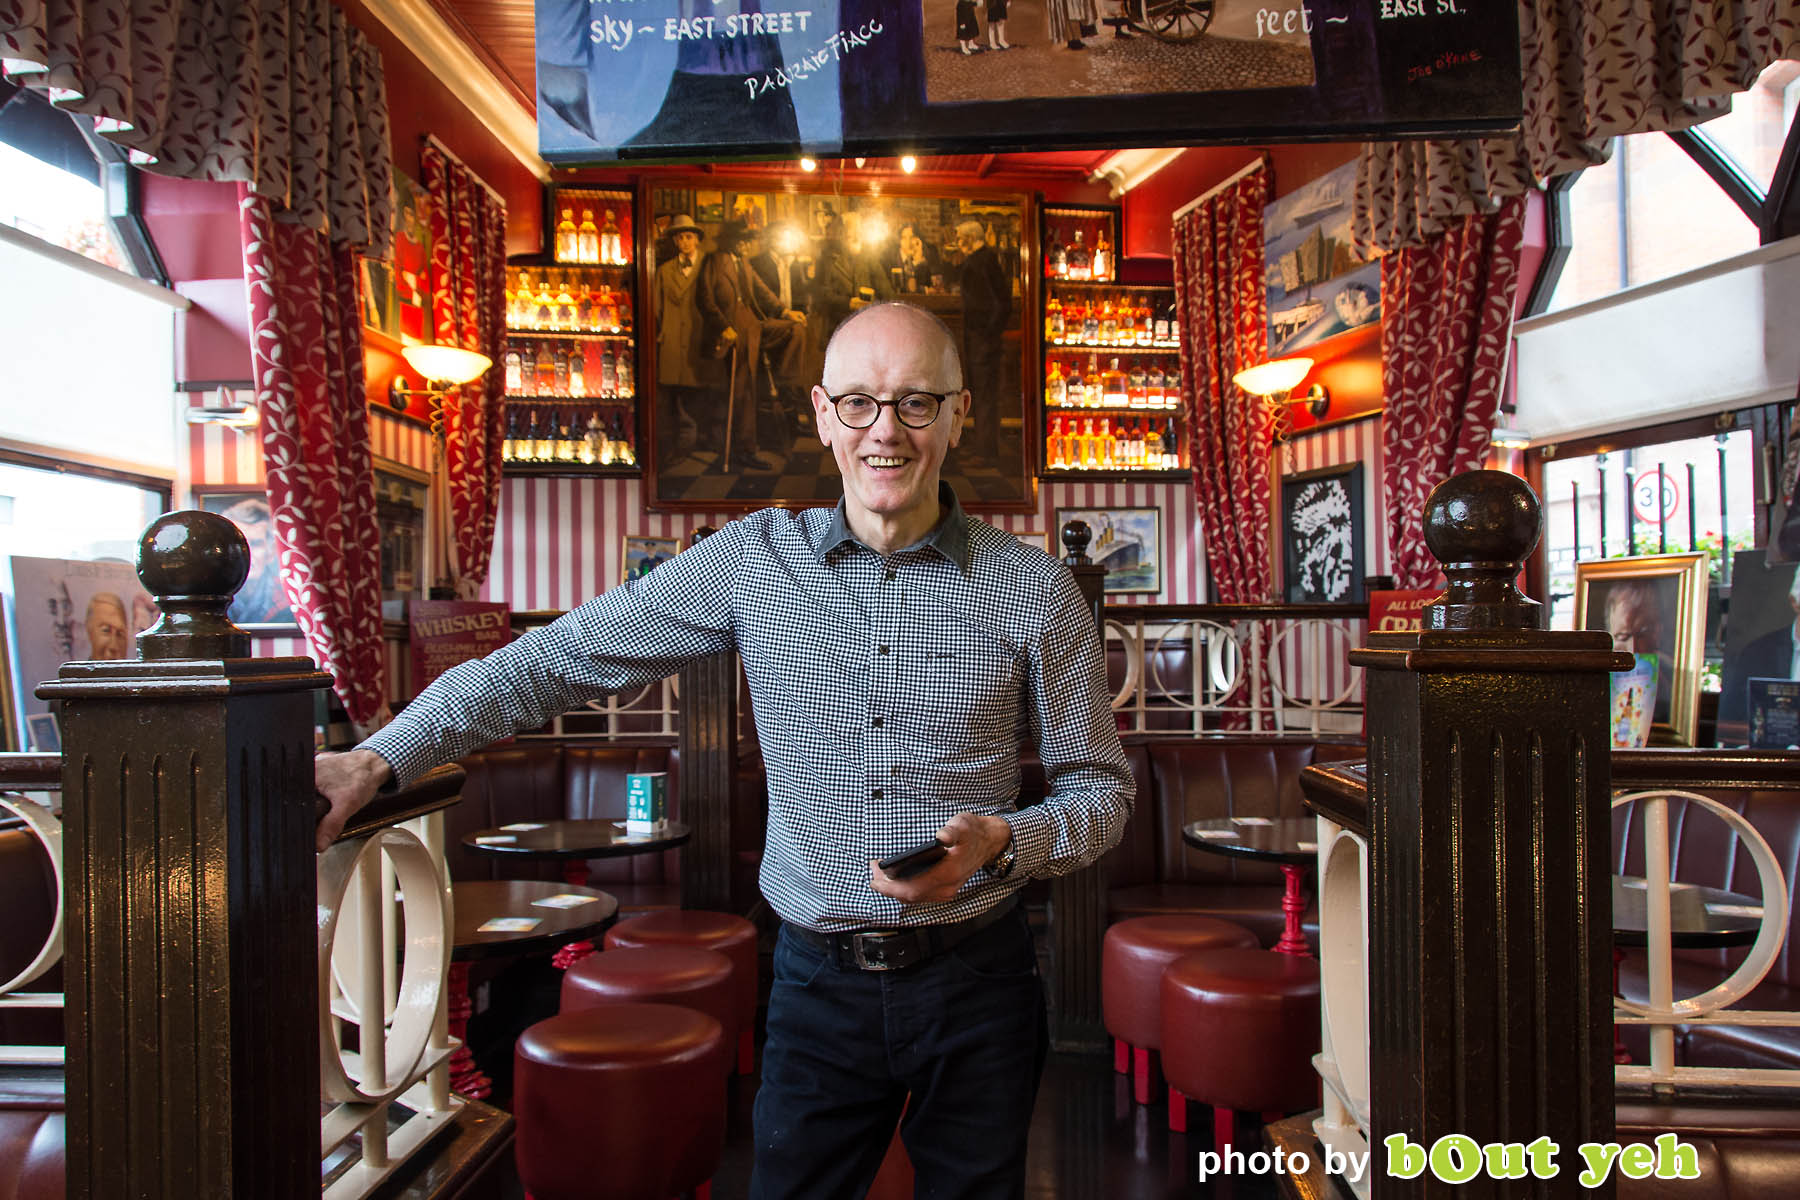 John Bittles, Bittles Bar, by Bout Yeh photographers Belfast - photo 5013. Editorial feature about John Bittles, owner of Bittles Bar, Belfast.